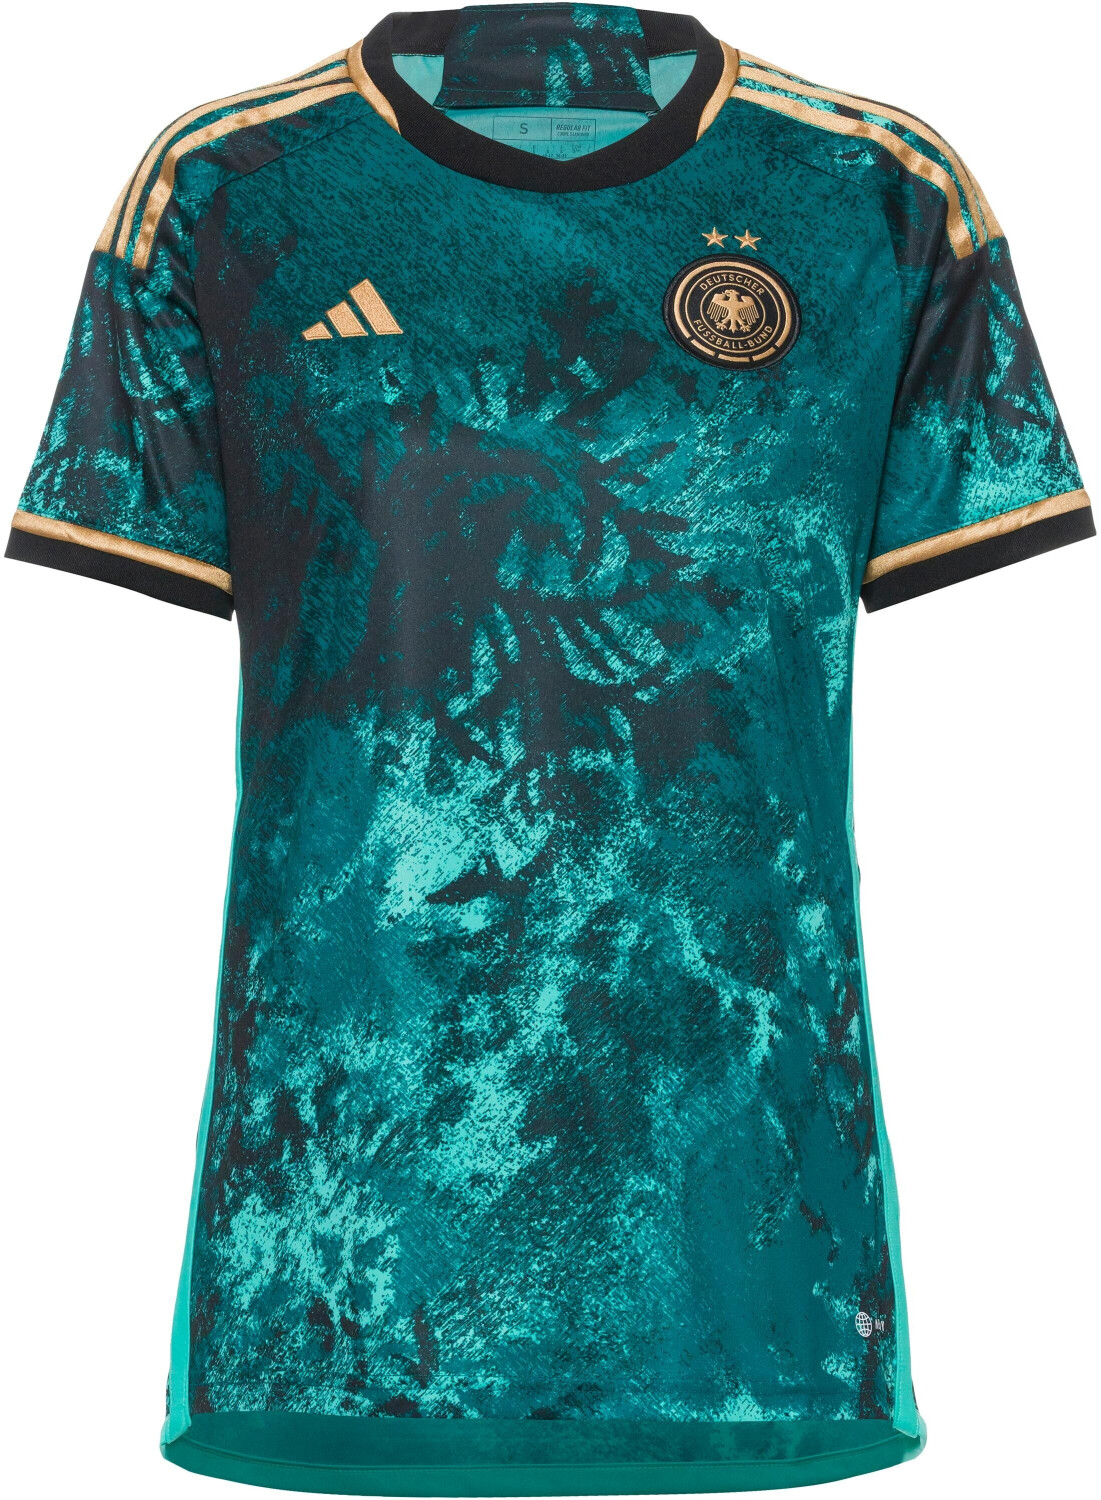 Buy Adidas Germany Shirt Women 2023 from £45.00 (Today) – Best Deals on ...